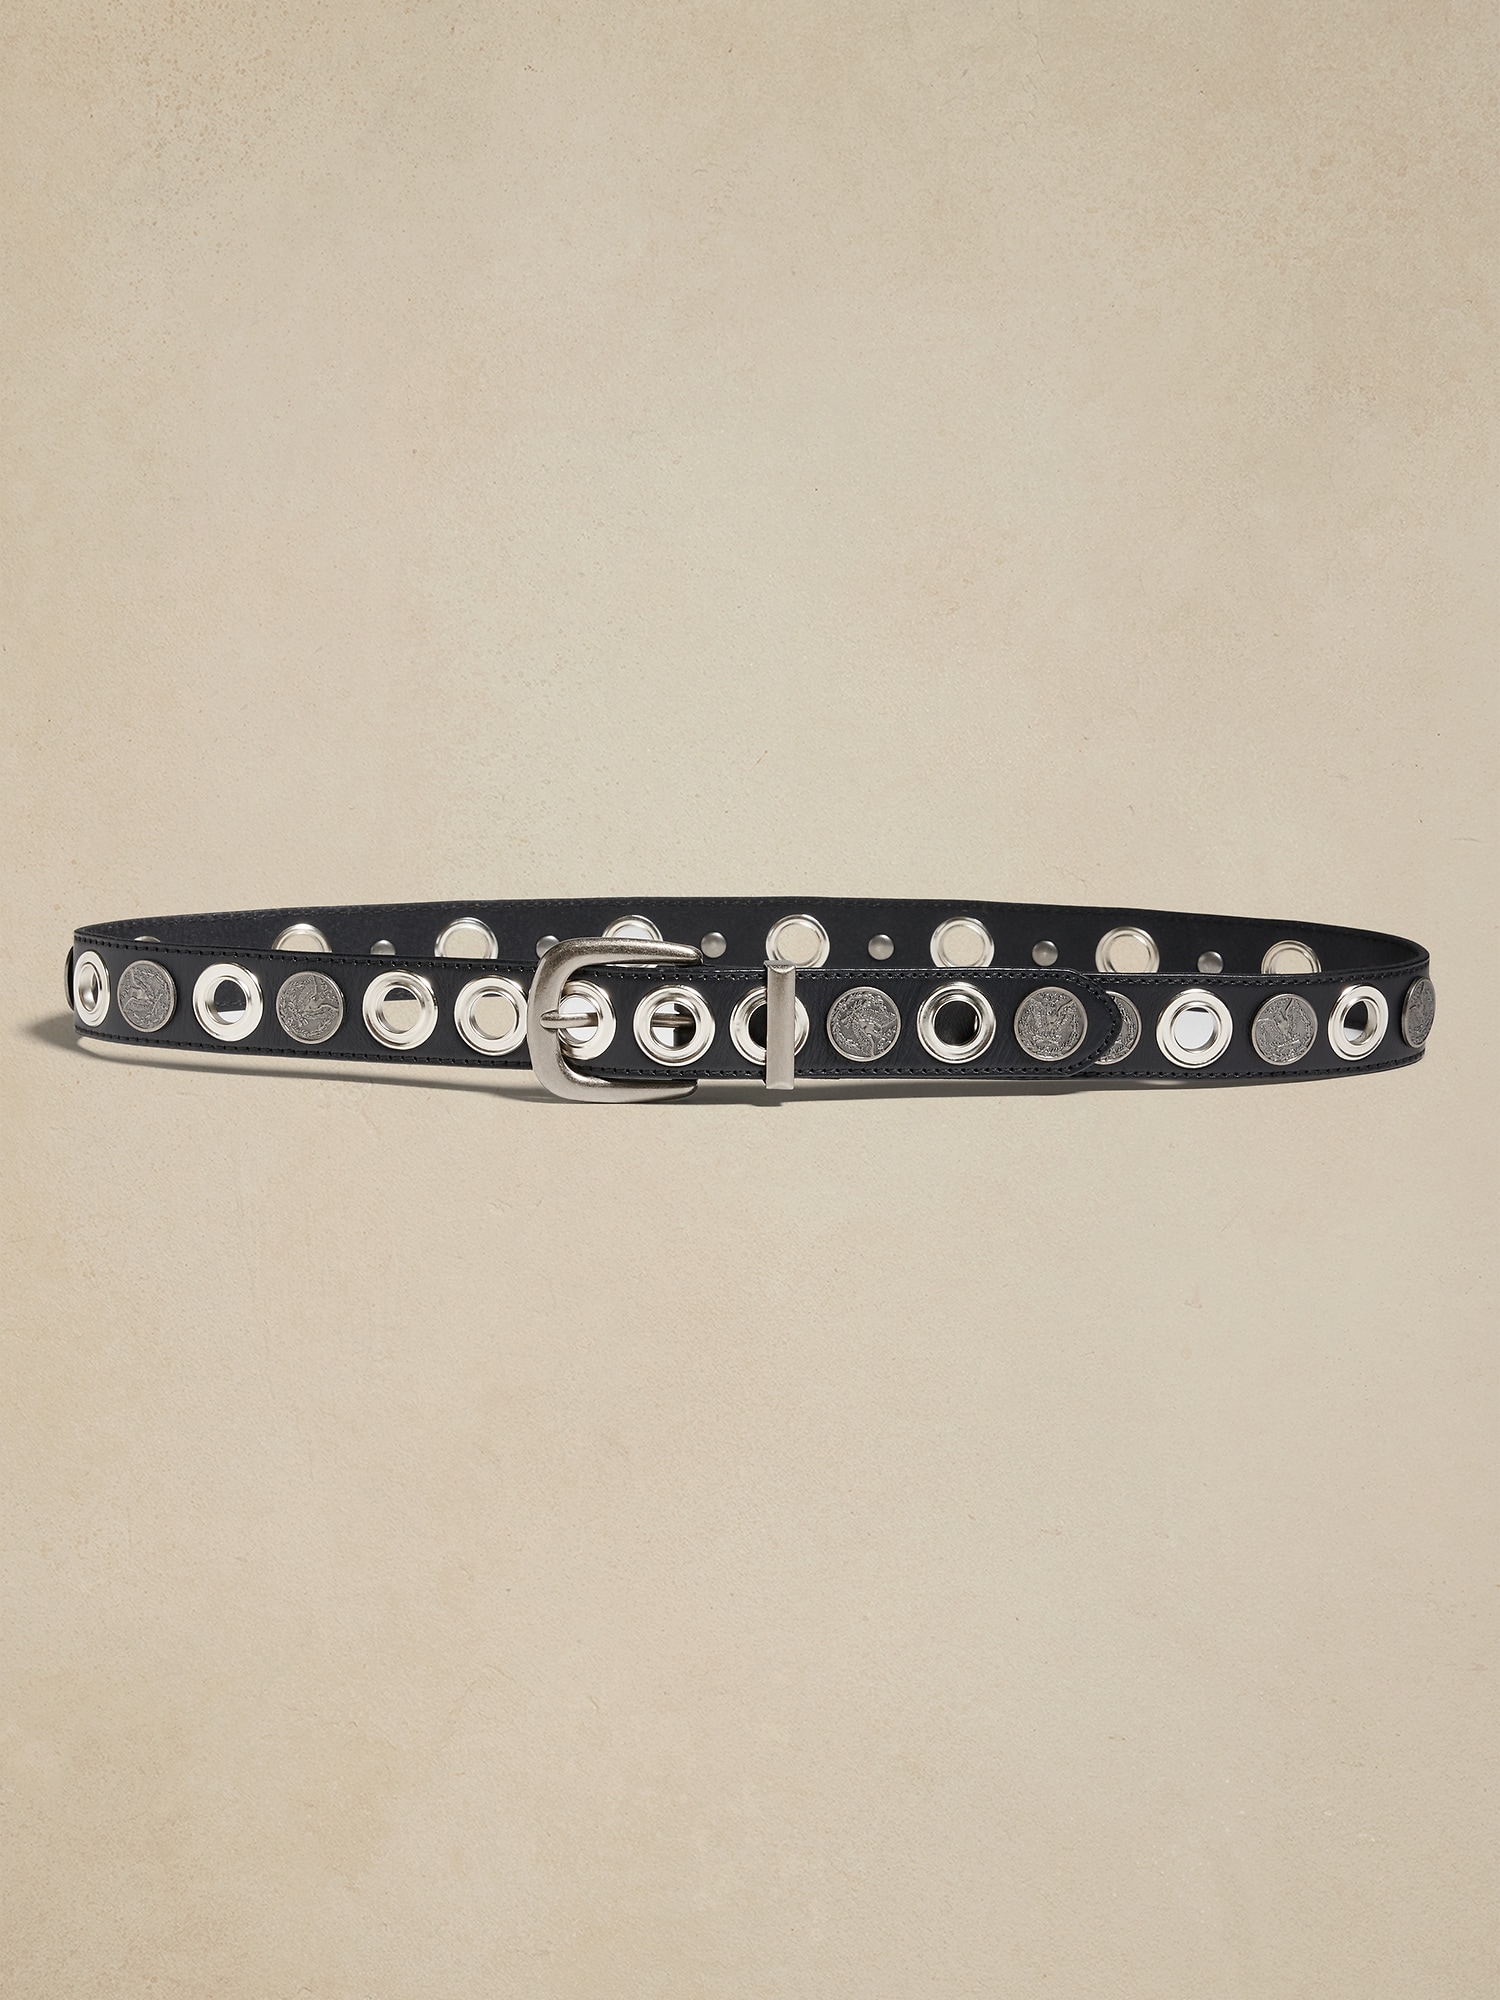 Solada Women's belt with metal eyelets: for sale at 9.99€ on